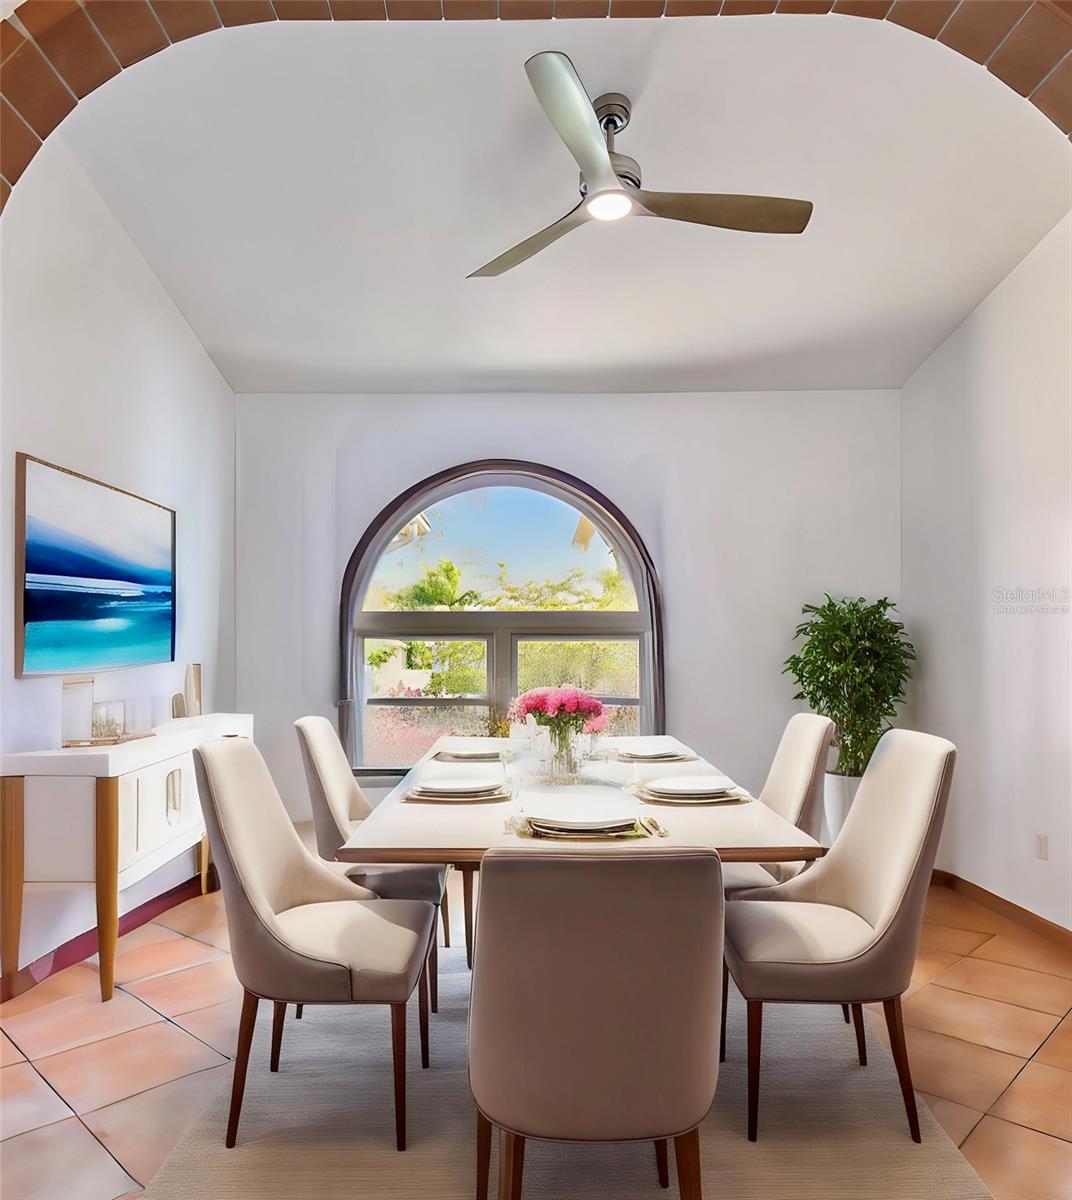 Spacious dining room could be additional living room